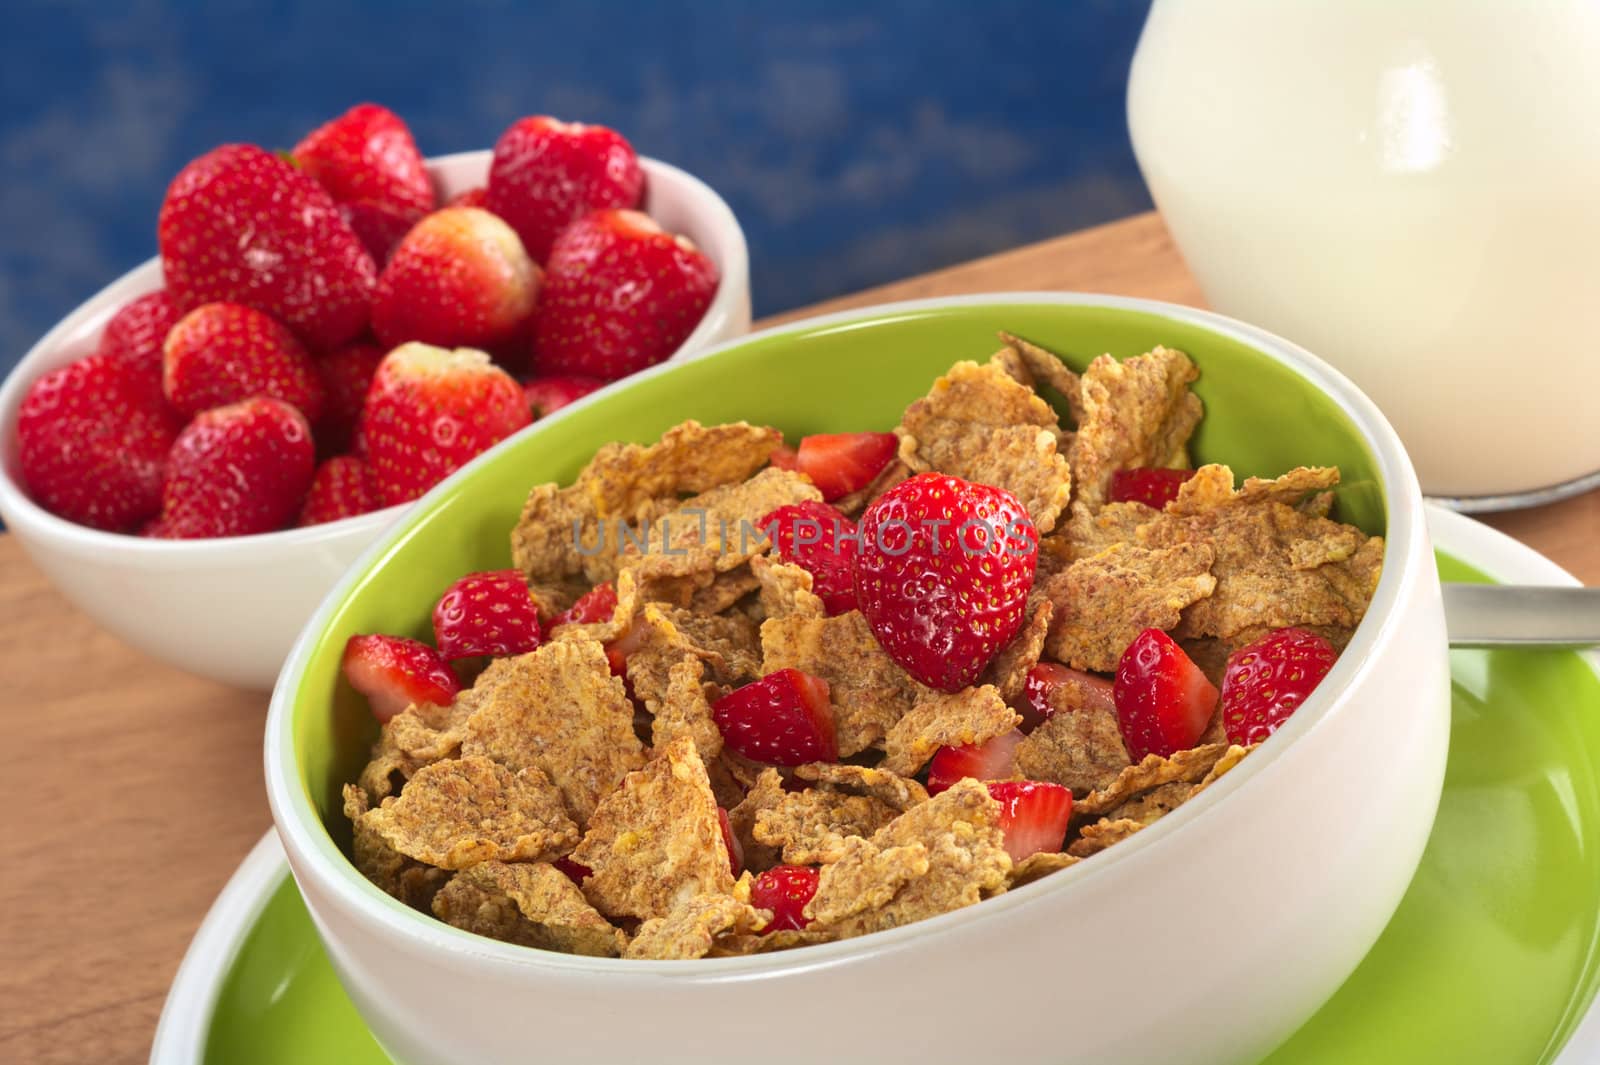 Wholewheat Cereal with Strawberries by sven